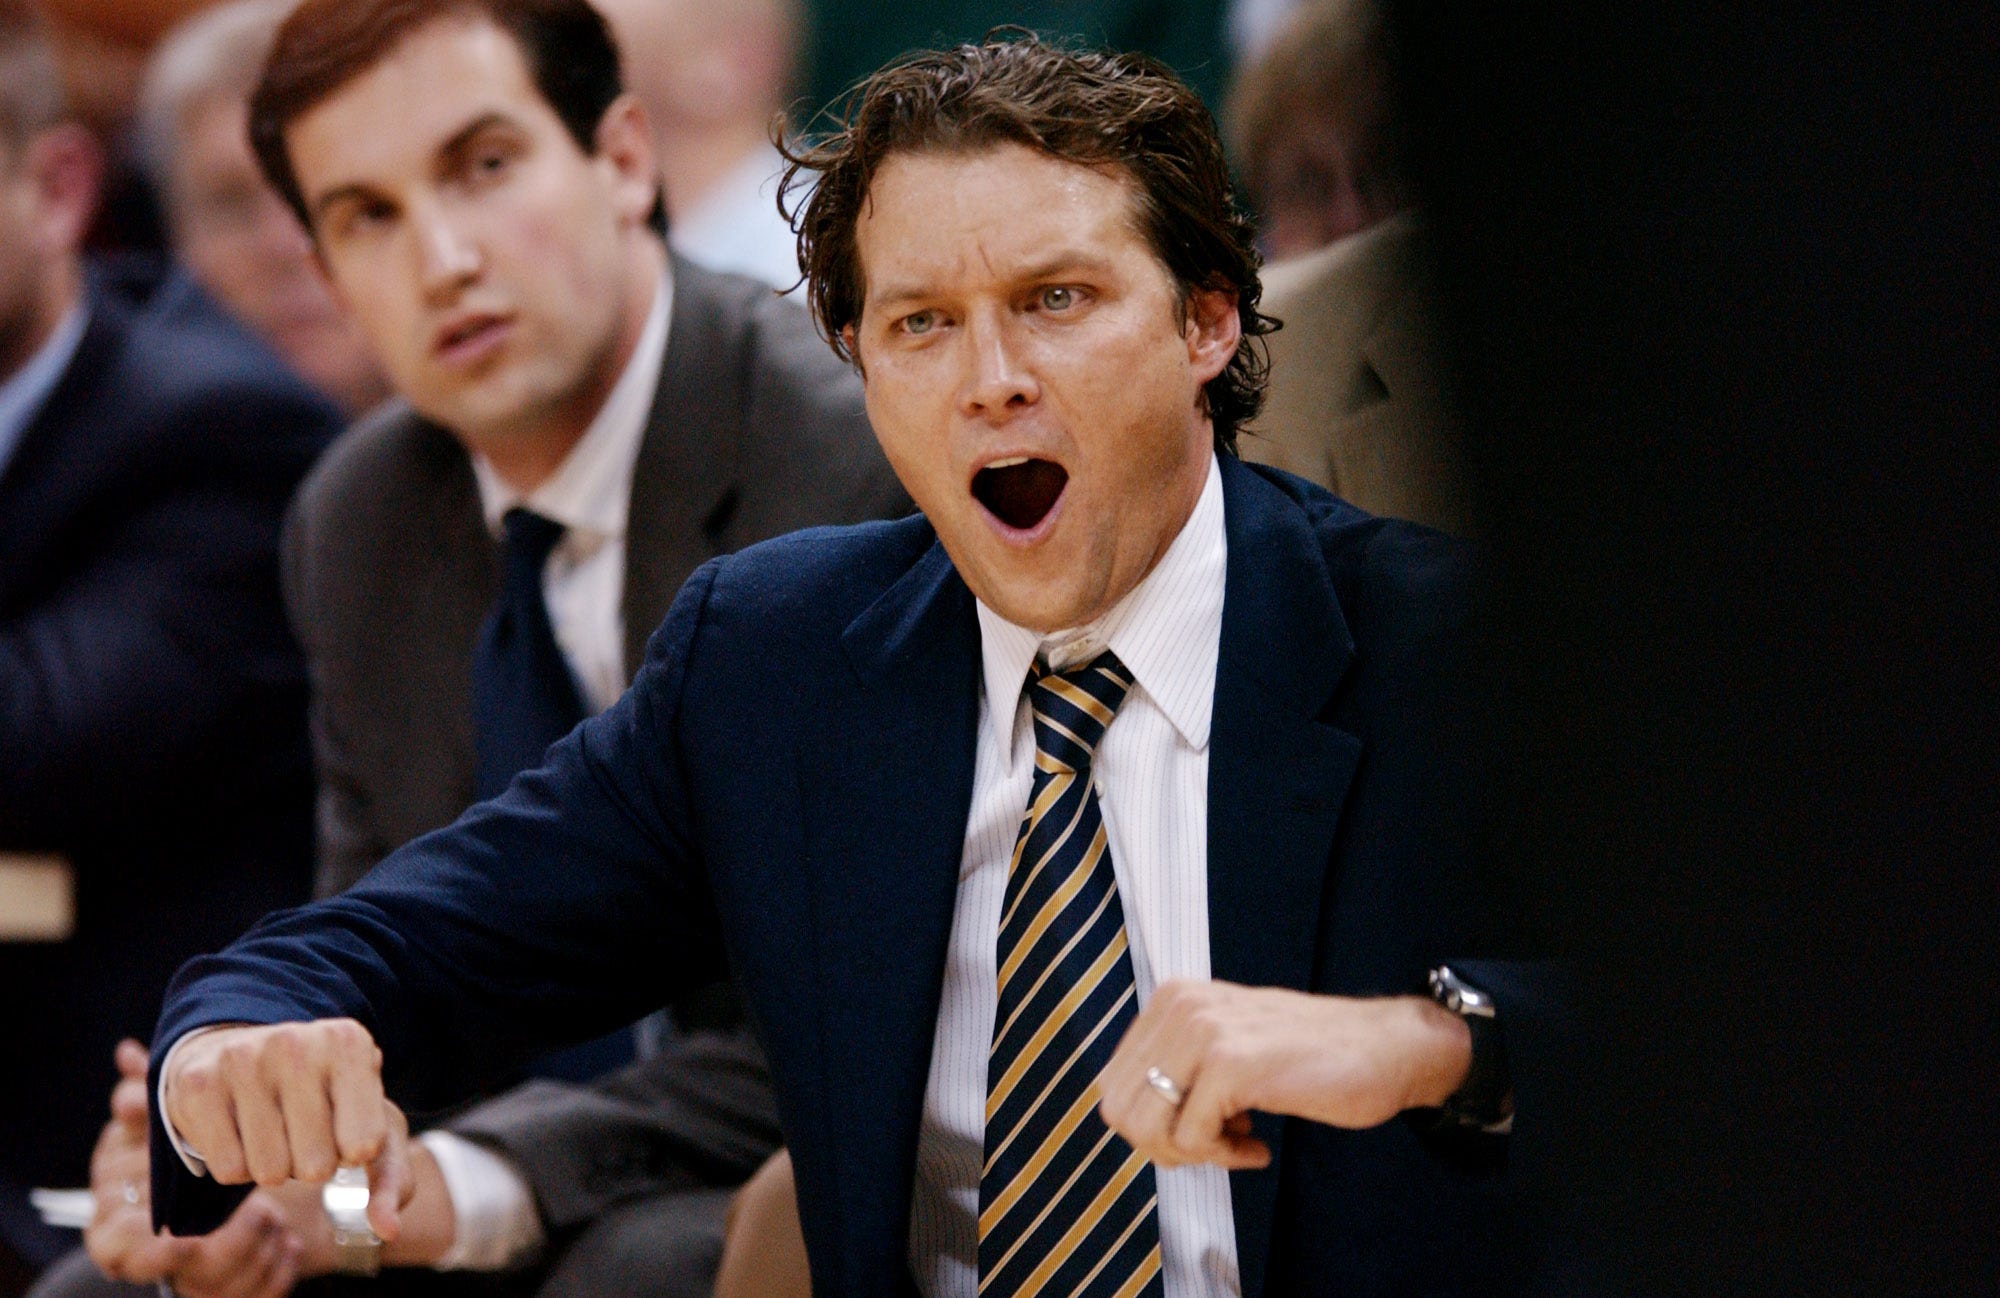 Unlike at Mizzou, Coach Quin Snyder leaving the Utah Jazz on his terms